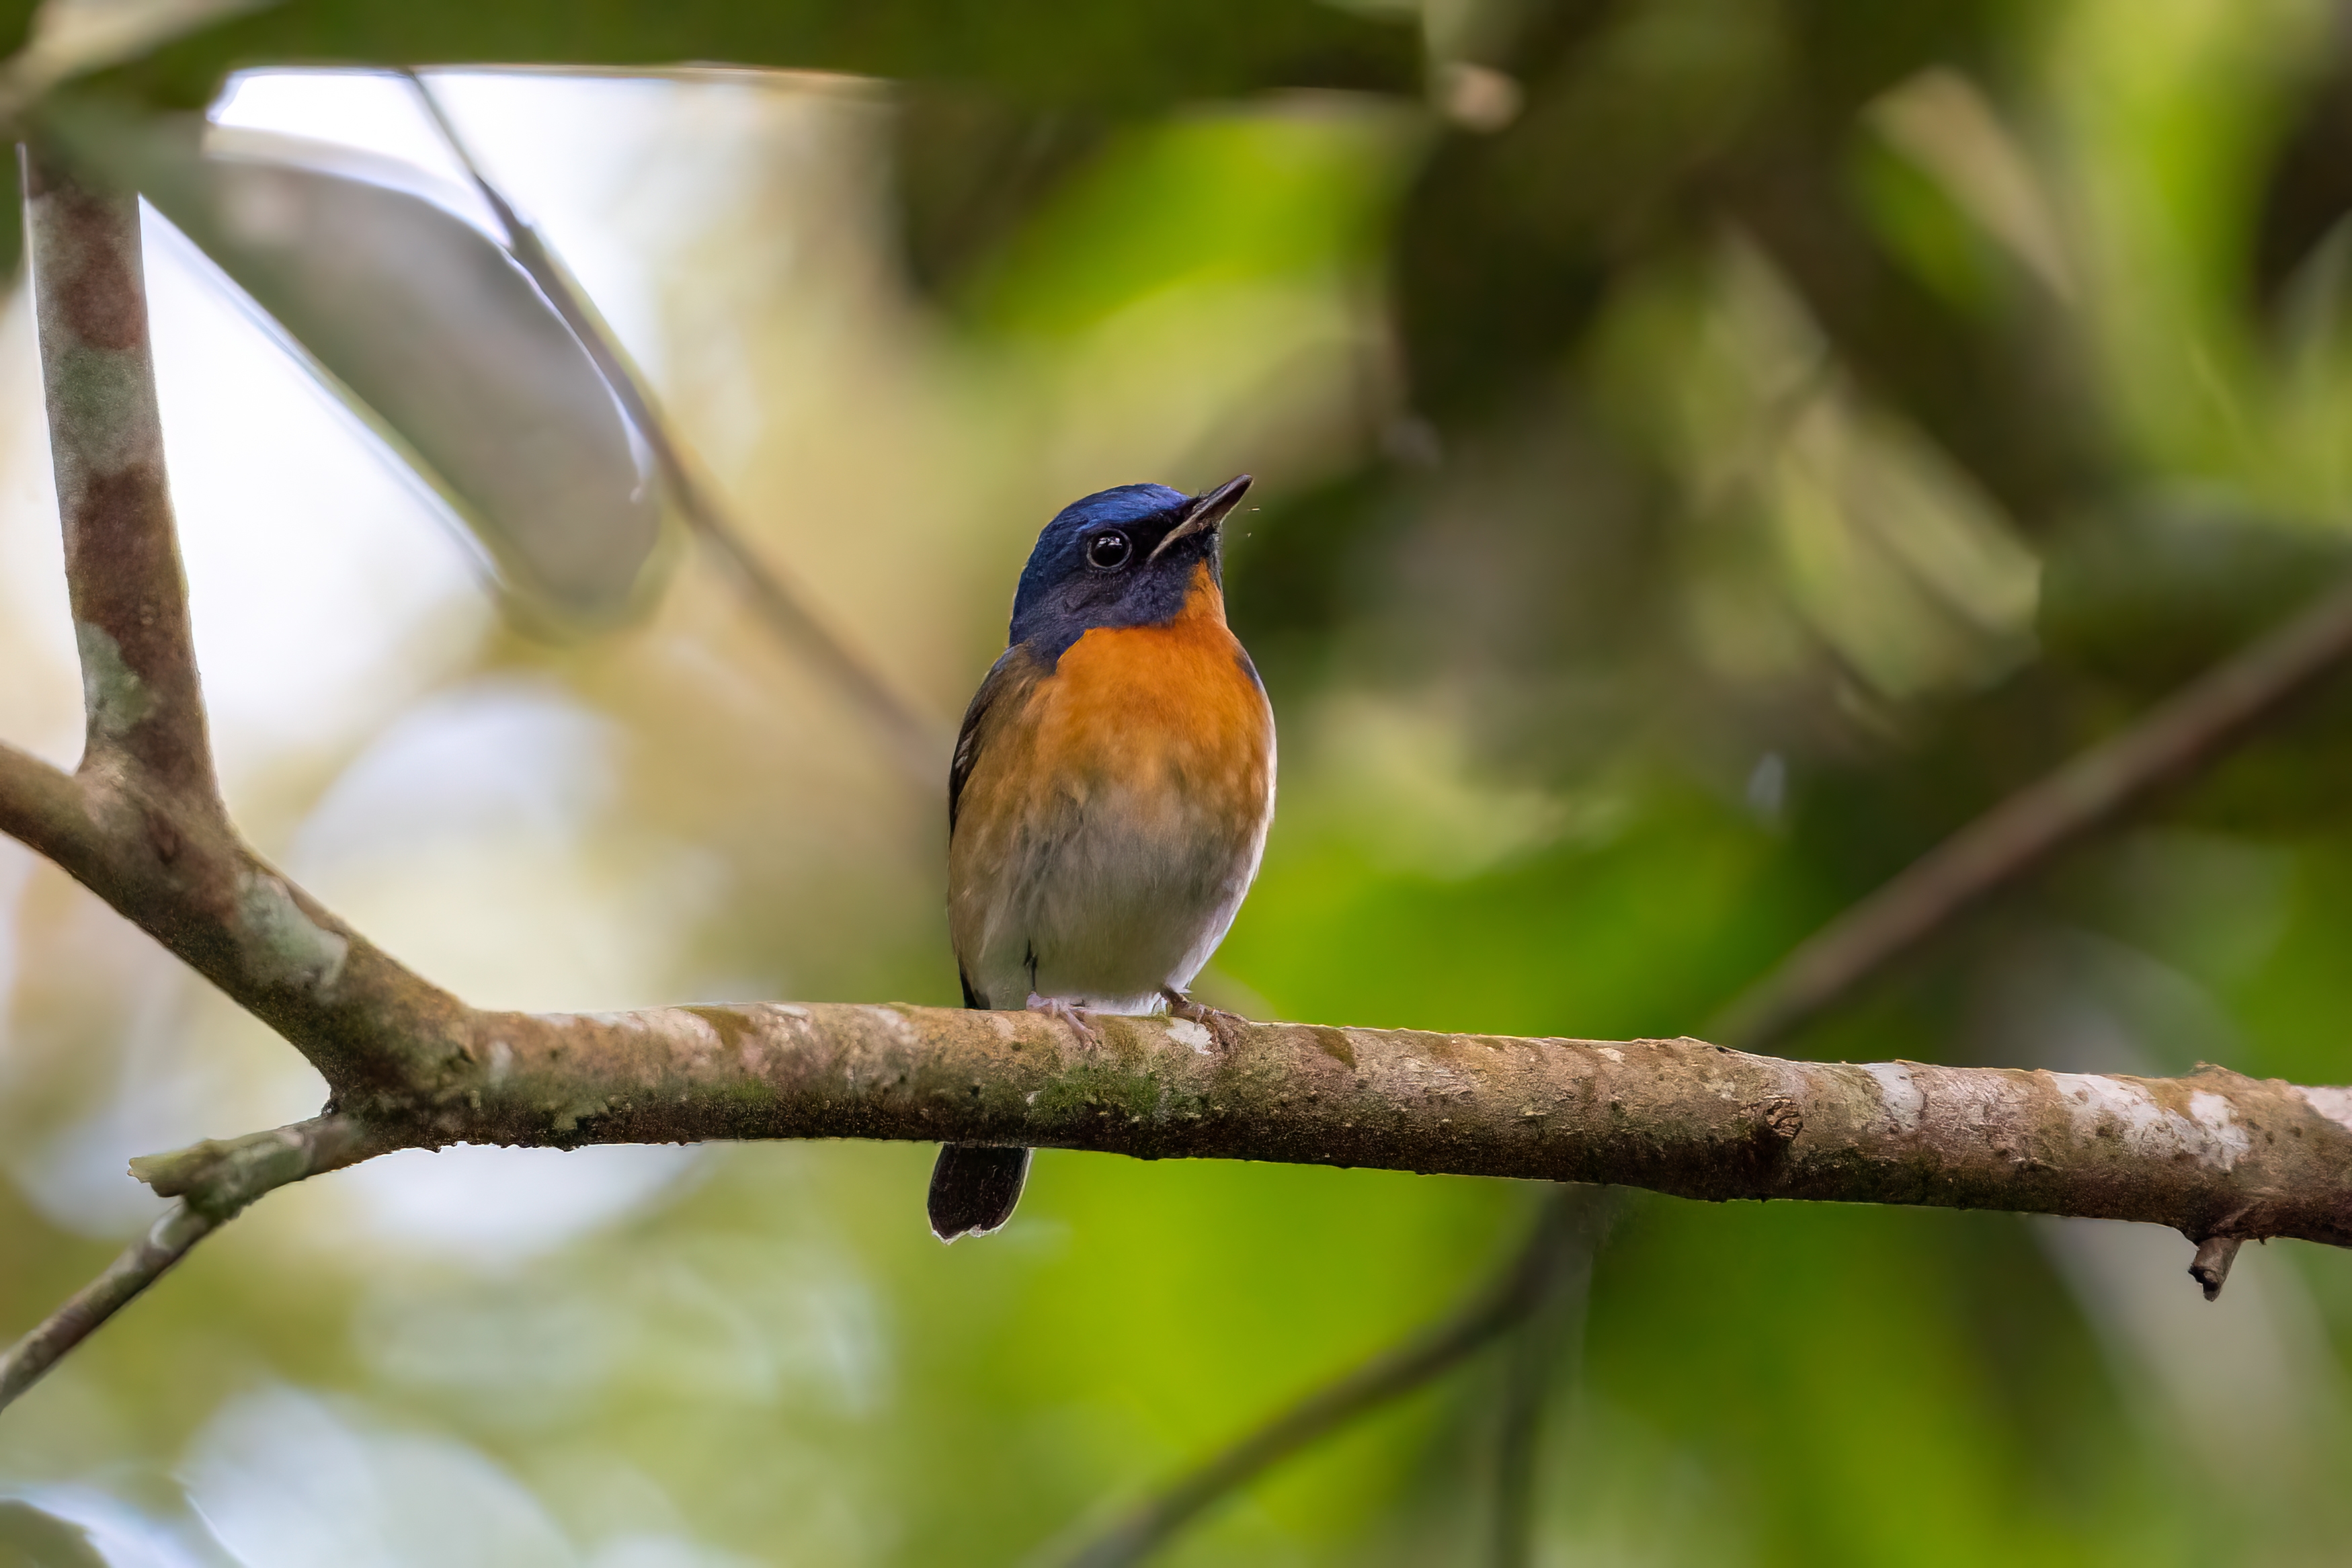 Chinese Blue Flycatcher at Dairy Farm Nature Park on 29 Oct 2022. Photo credit: Jared Tan